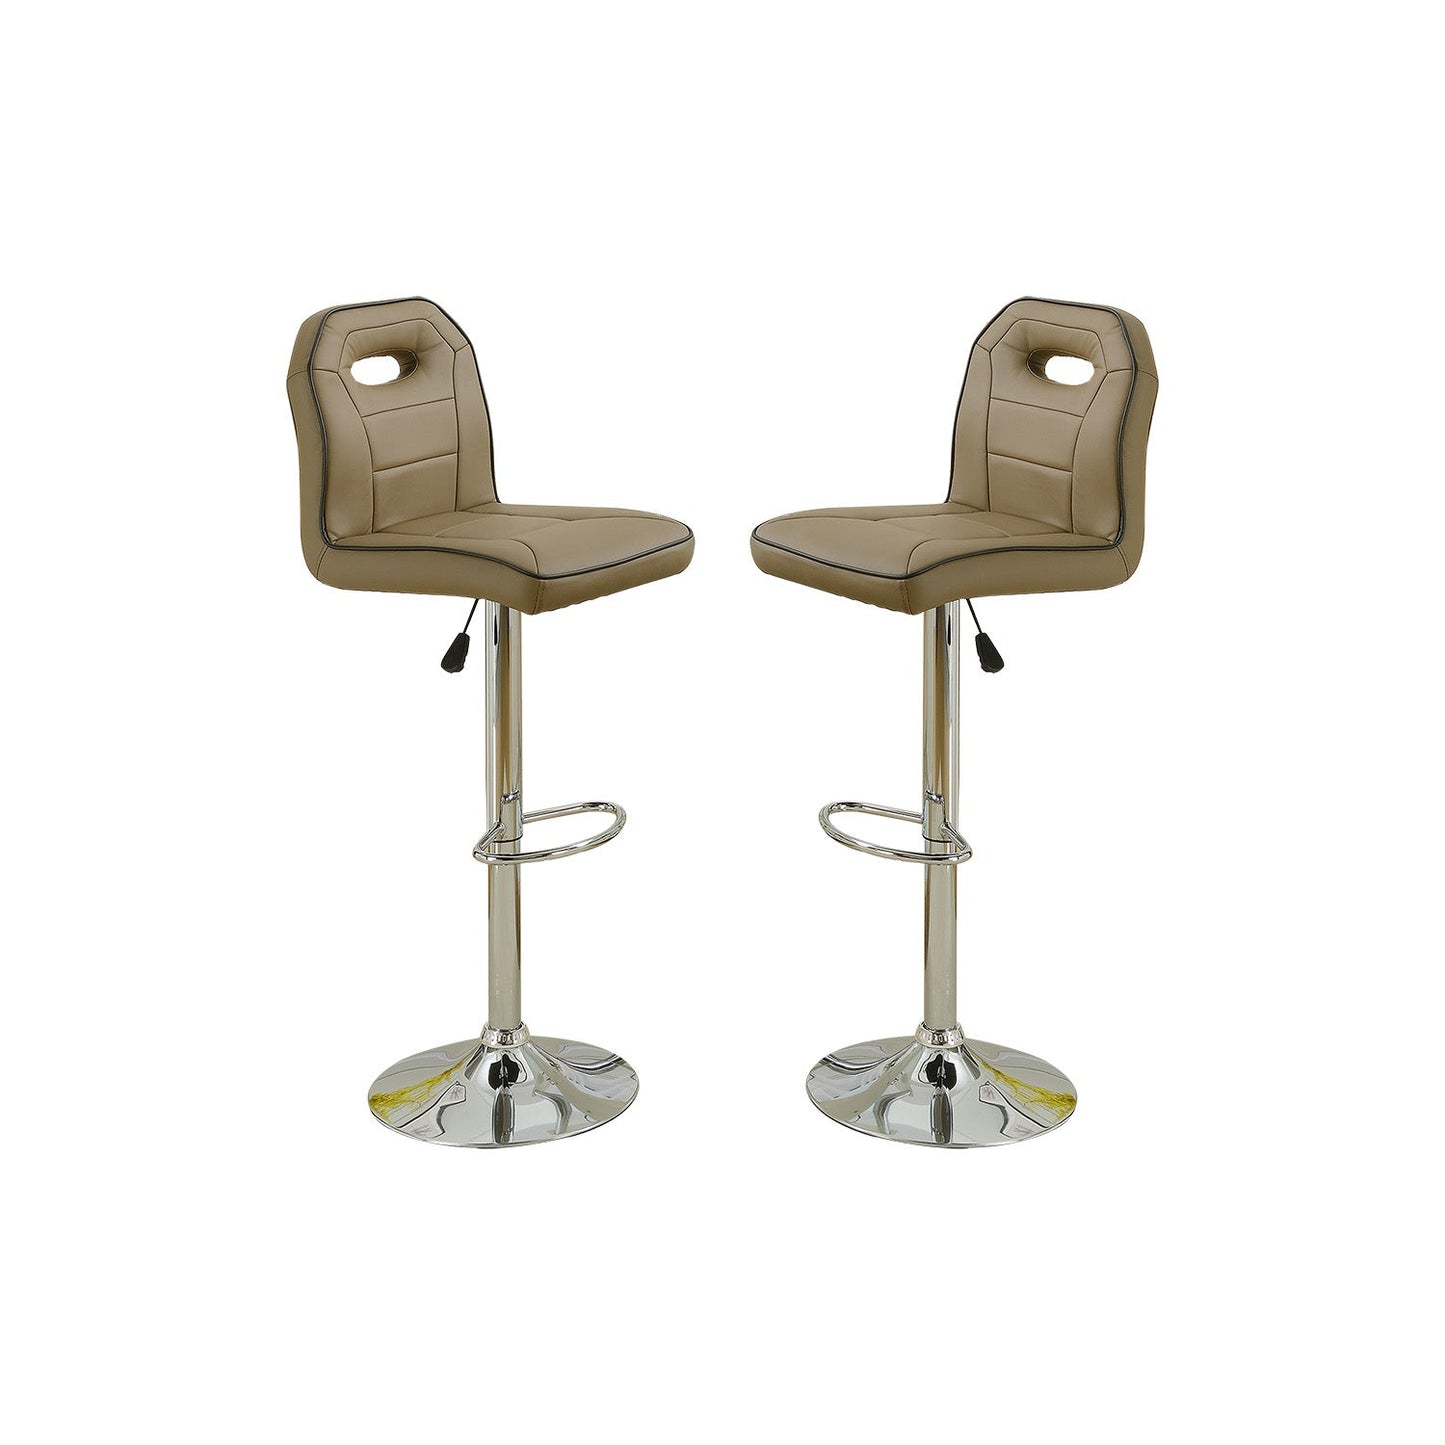 Accented Piping Trim Faux Leather Bar Stools (Set of 2) - Demine Essentials